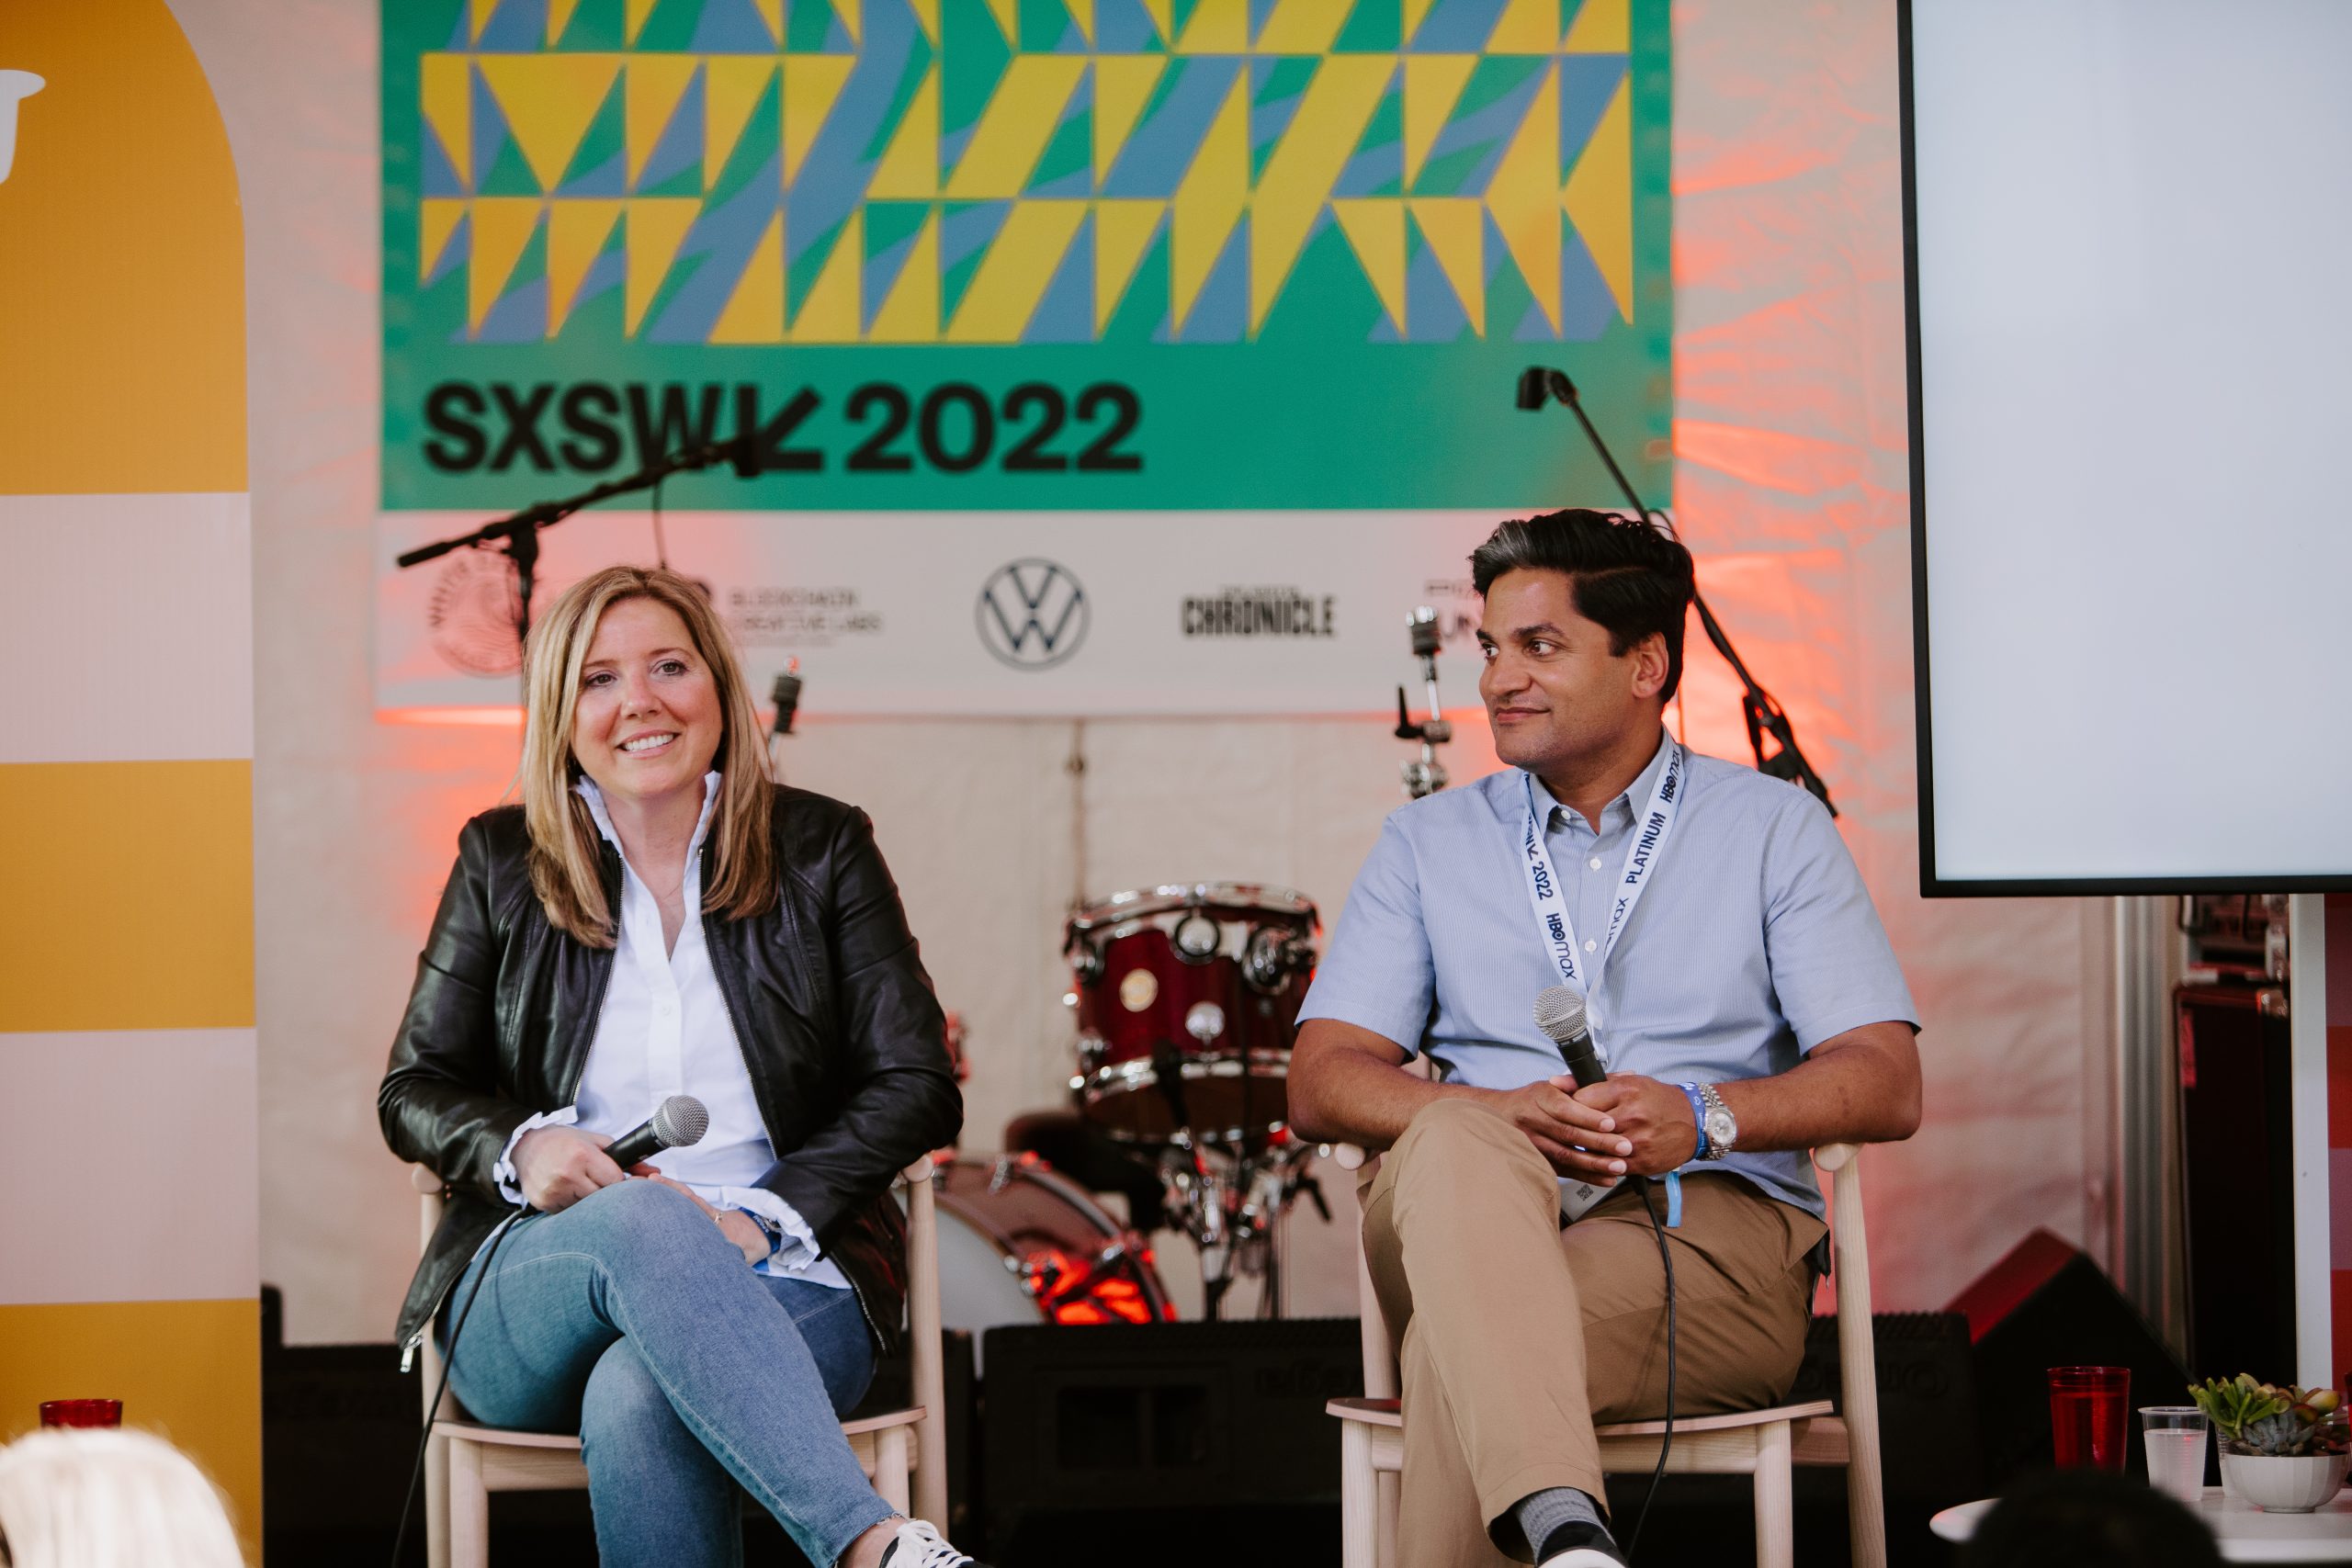 Carolina Pluszczynski, Michigan Central development director, was joined by Satish Rao, chief product officer of Newlab participating in the panel discussion on the topic of ingredients for impactful innovation at SxSW.